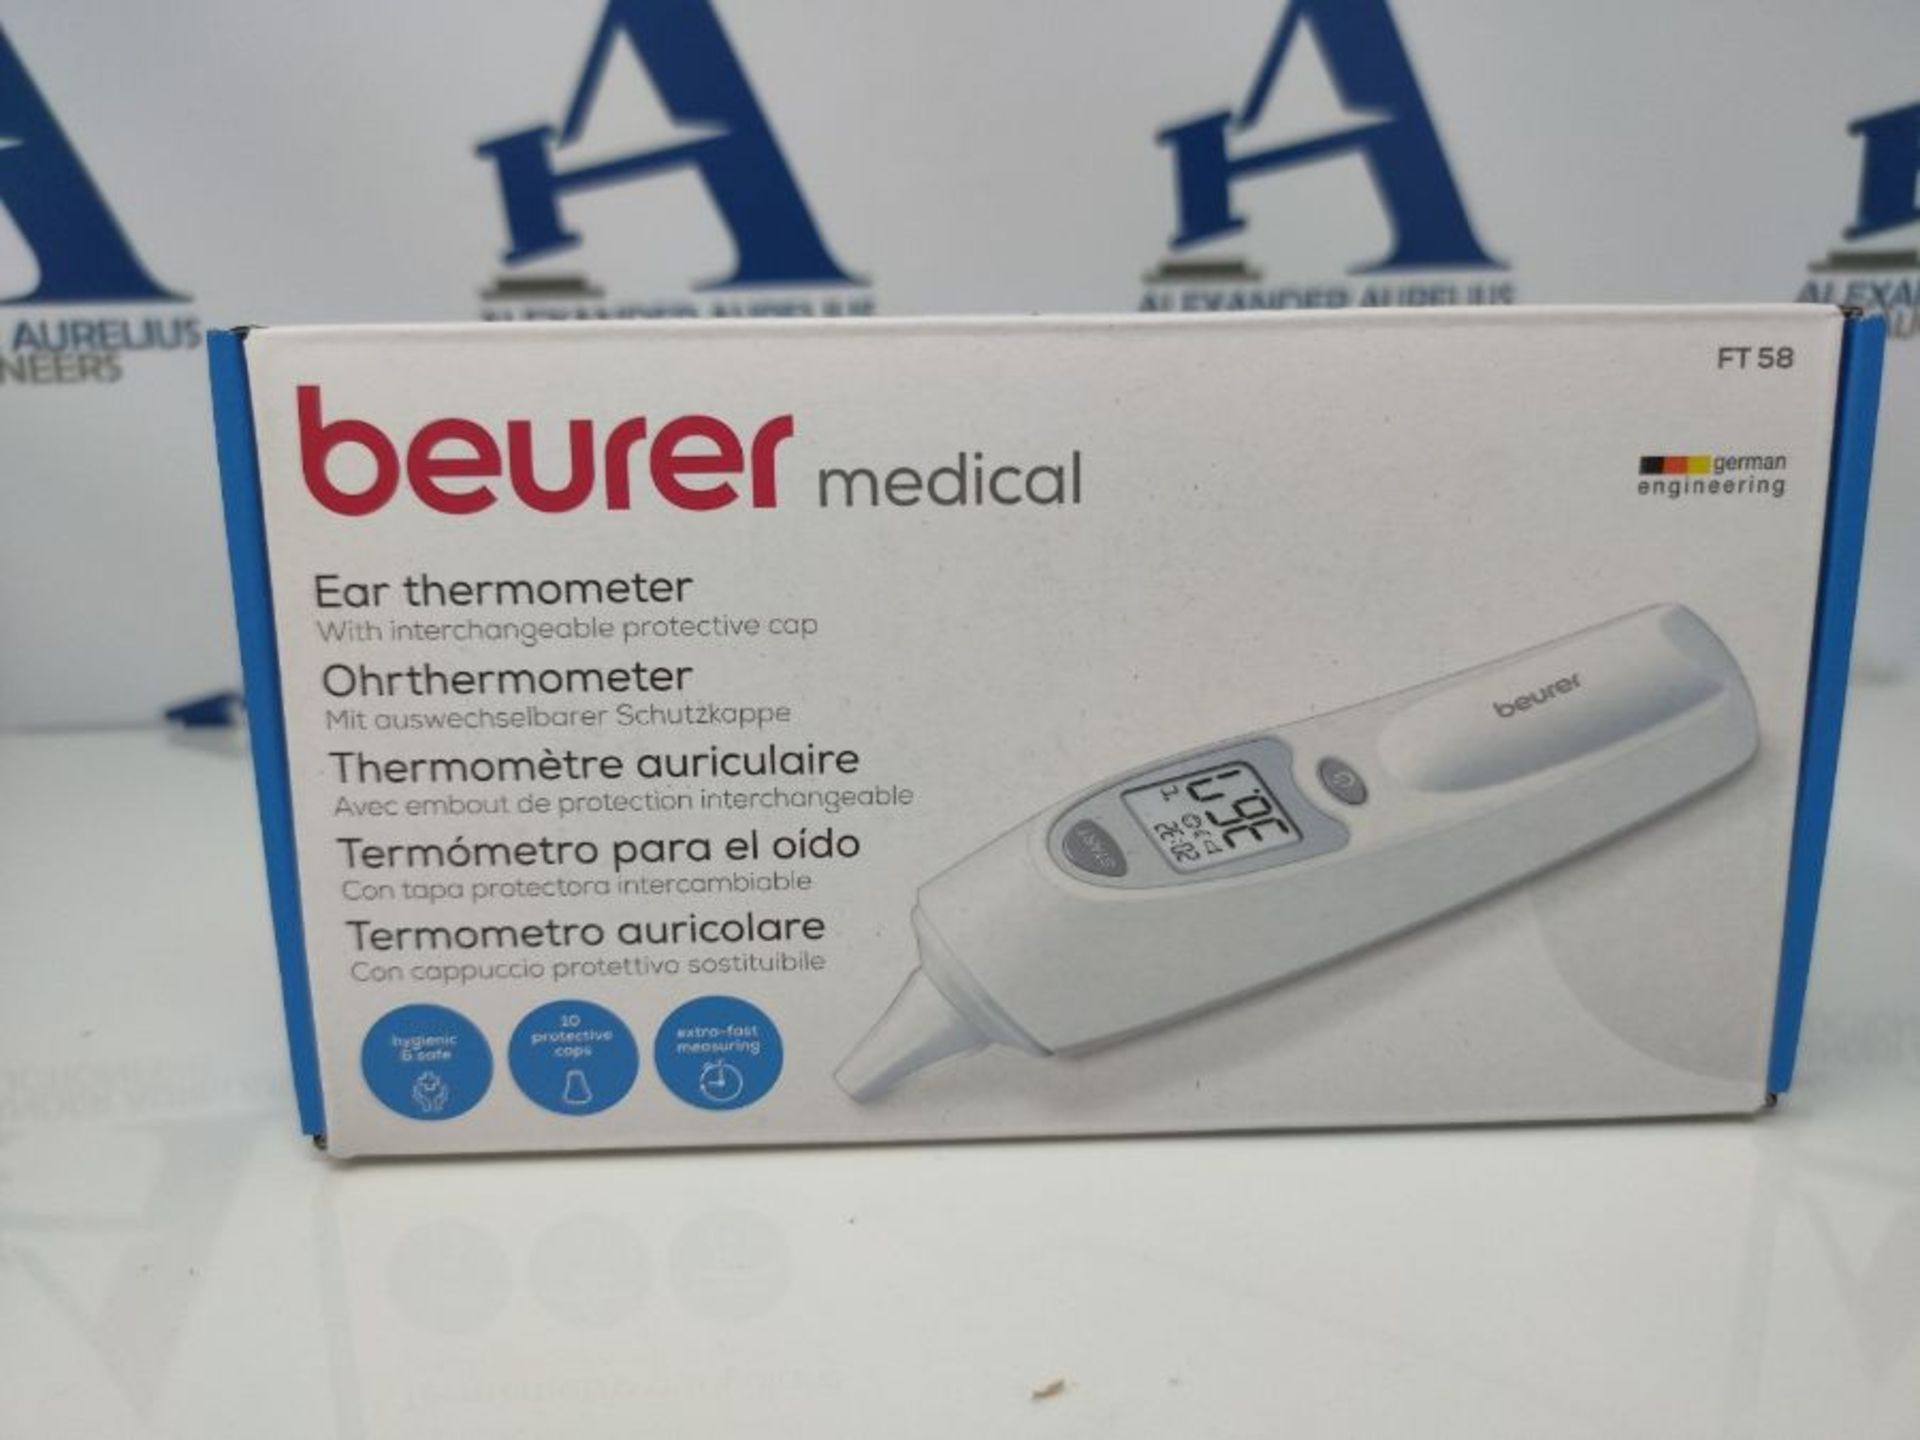 Beurer FT58 Ear Thermometer, 795.33 - Image 2 of 3